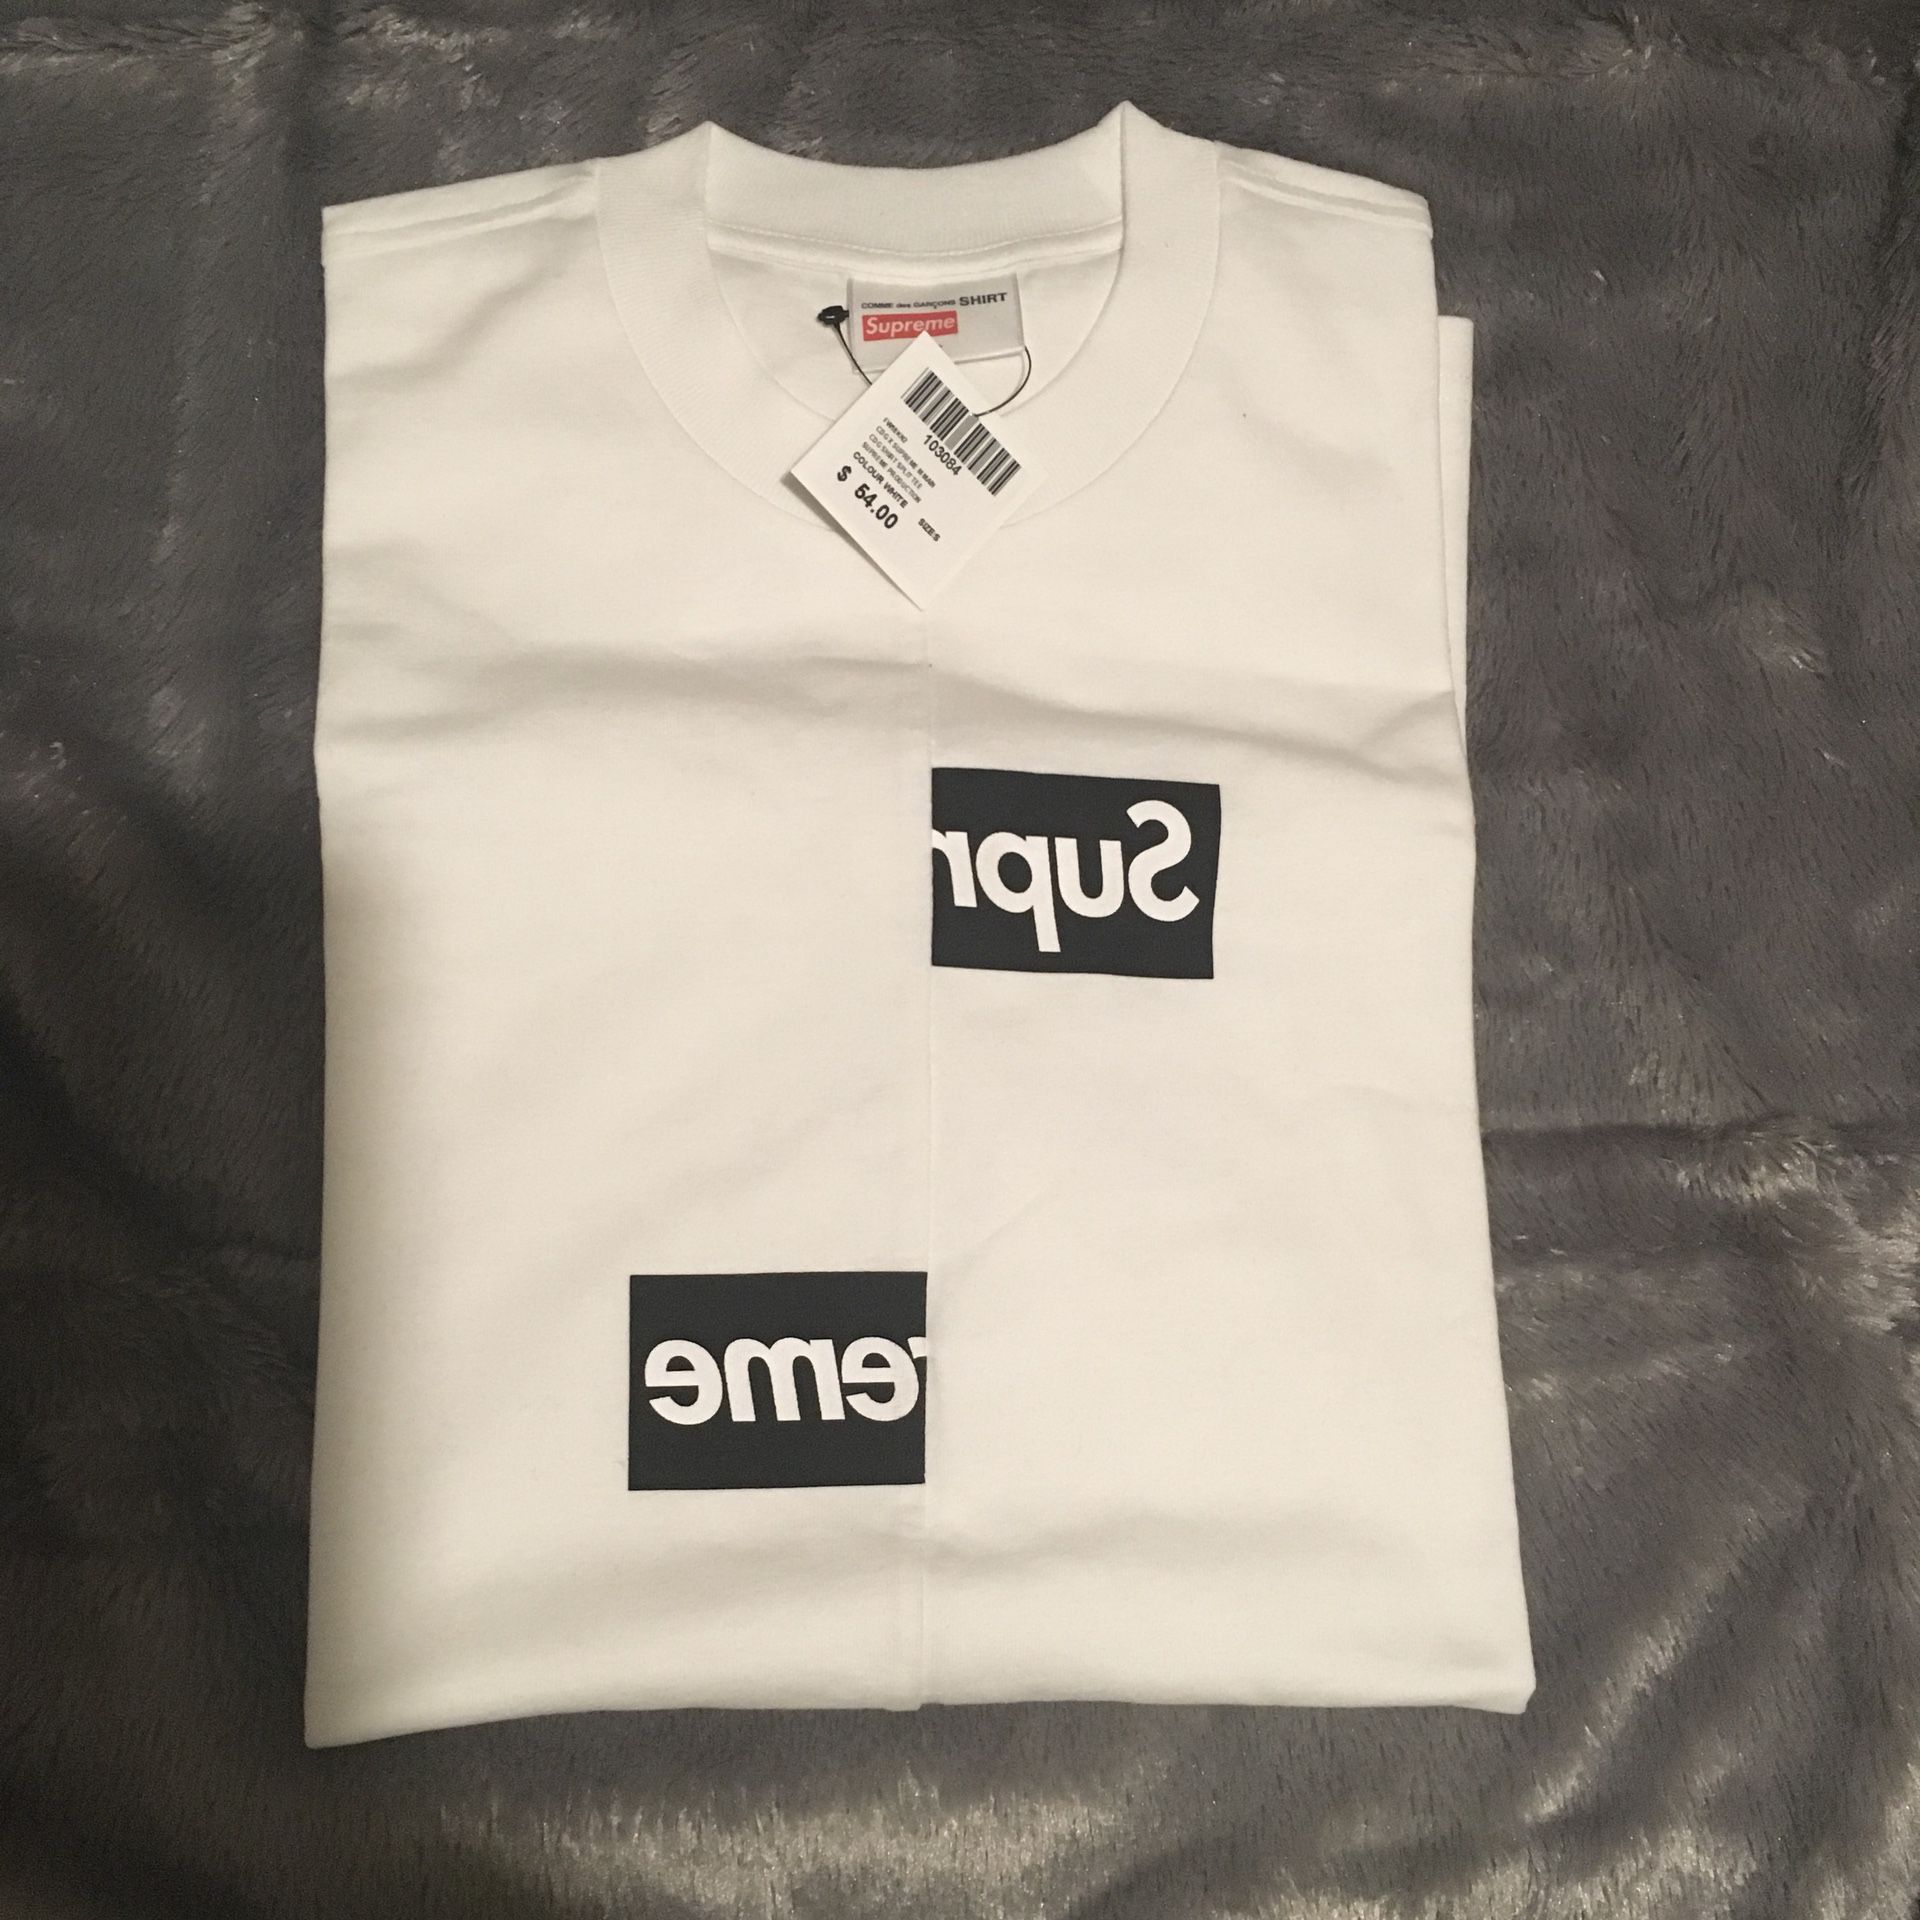 Supreme Tonal Box Logo Tee for Sale in Portland, OR - OfferUp